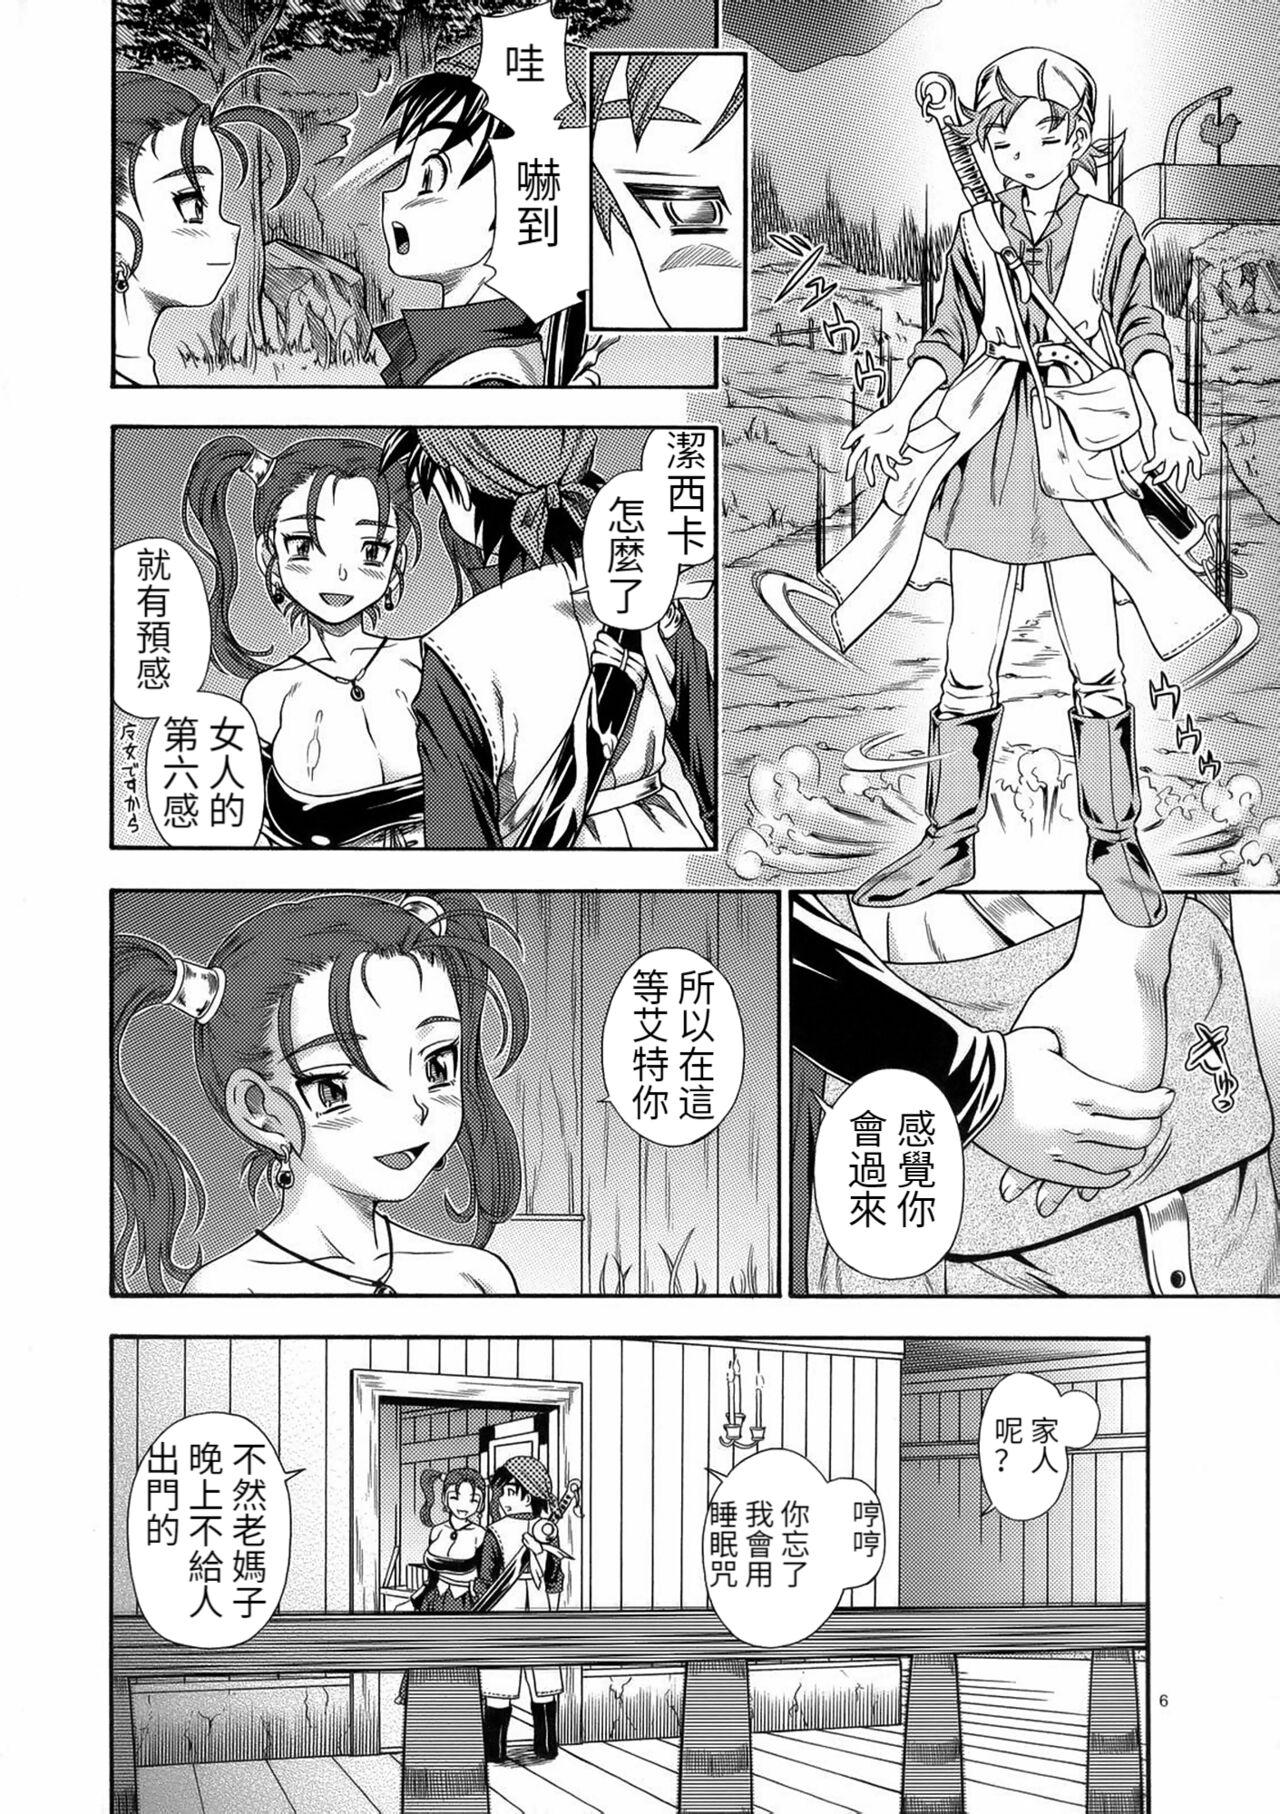 Old Young Jessica Milk 8.0 - Dragon quest viii Orgia - Page 7